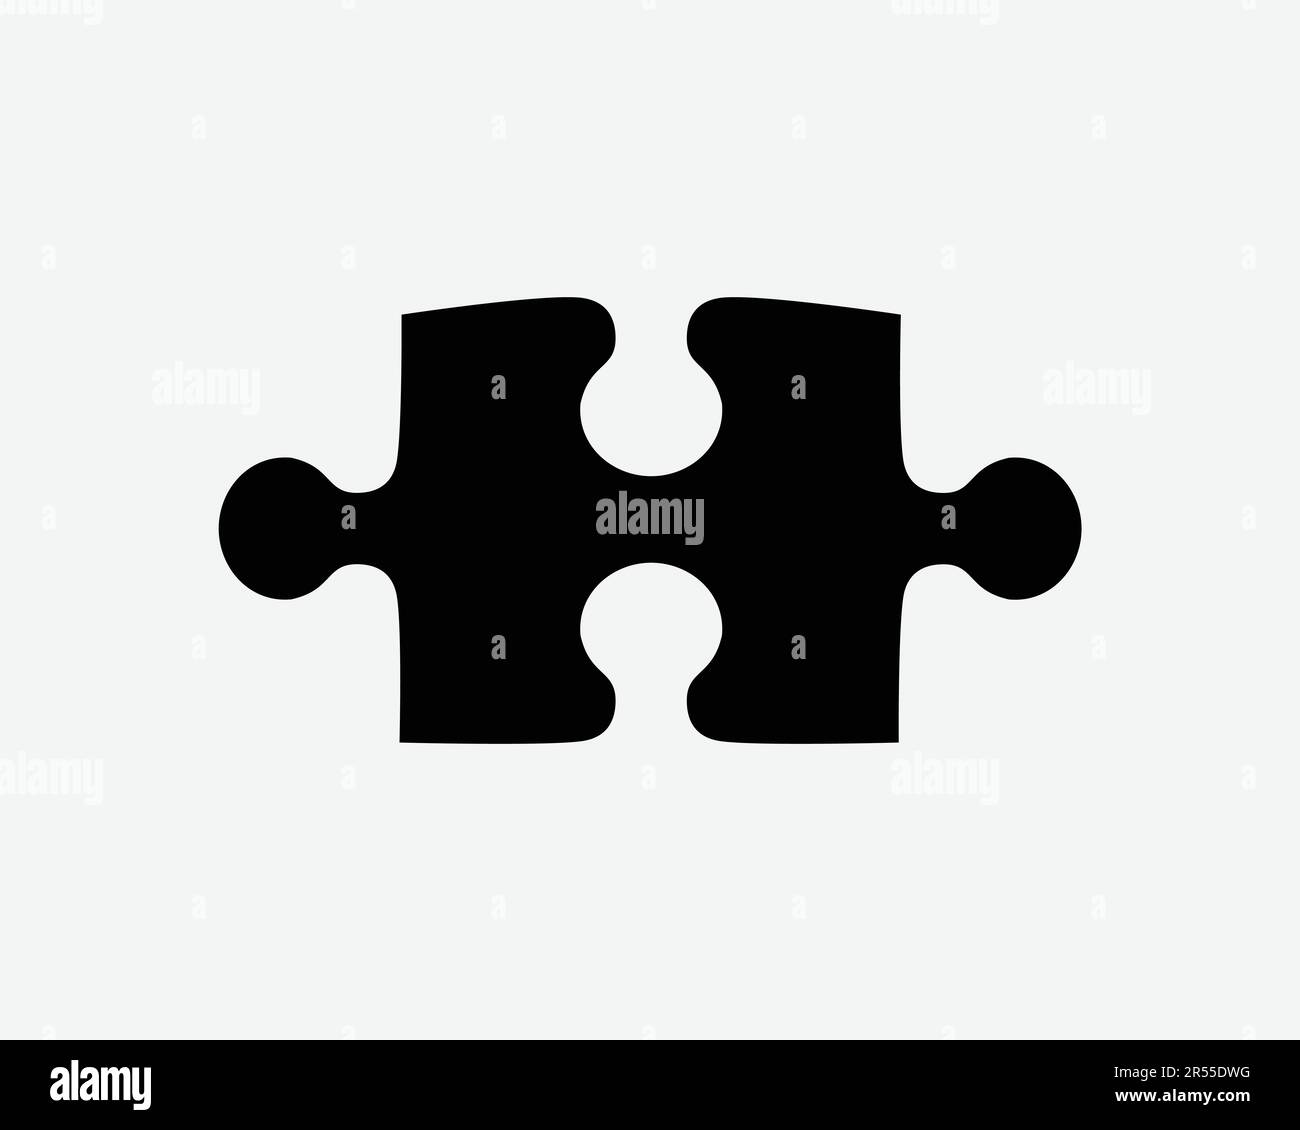 Puzzle Piece Icon. Jigsaw Part Game Toy Strategy Match Challenge Skill Assemble Maze Sign Symbol Black Artwork Graphic Illustration Clipart EPS Vector Stock Vector